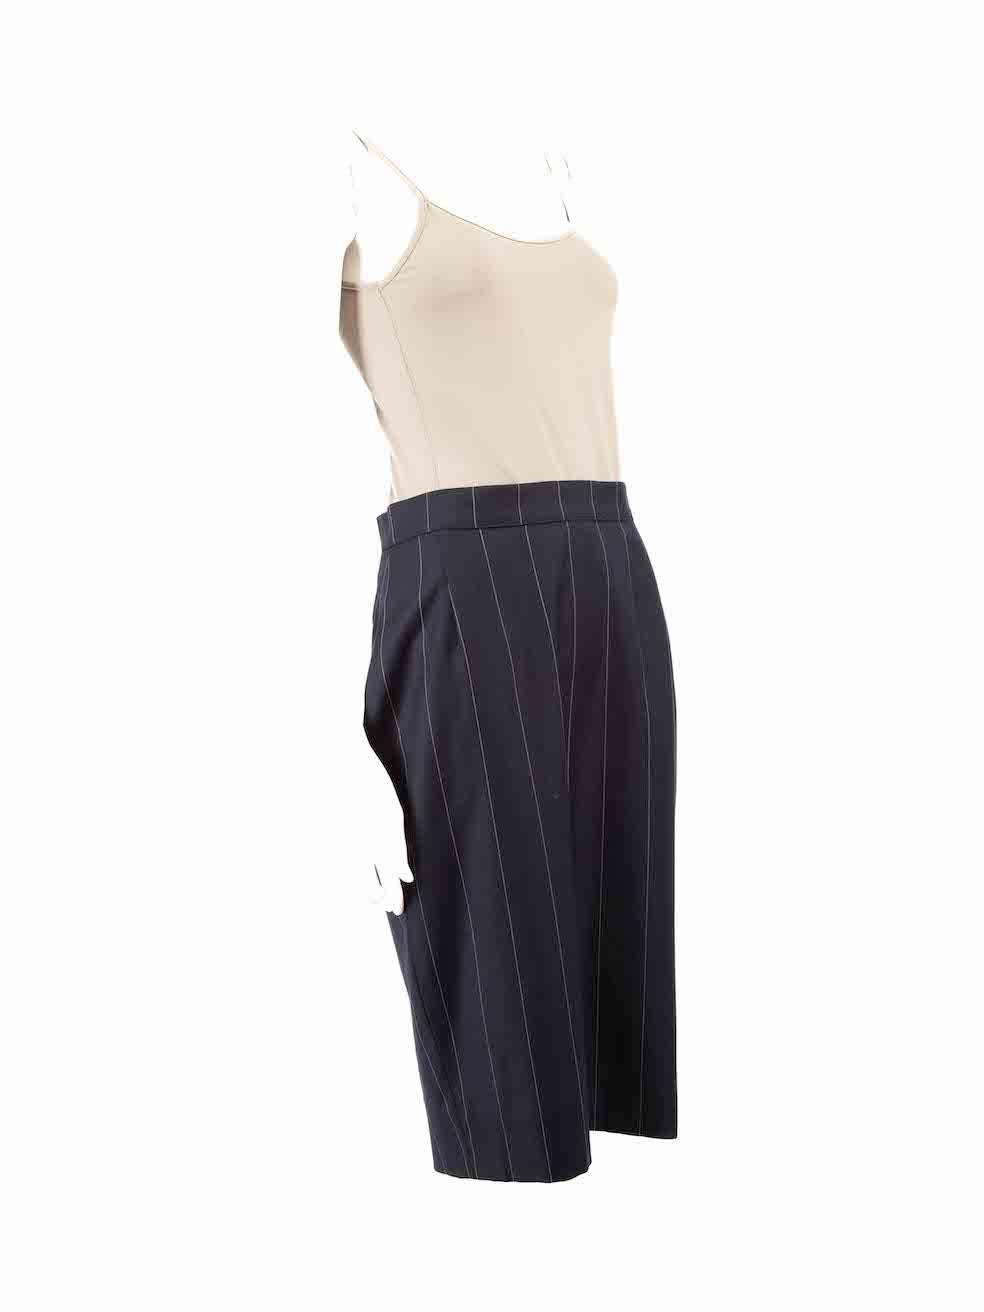 CONDITION is Very good. Hardly any visible wear to skirt is evident on this used Gai Mattiolo designer resale item.
 
 
 
 Details
 
 
 Navy
 
 Wool
 
 Skirt
 
 Pinstripe pattern
 
 Knee length
 
 Straight fit
 
 Back zip and button fastening
 
 
 
